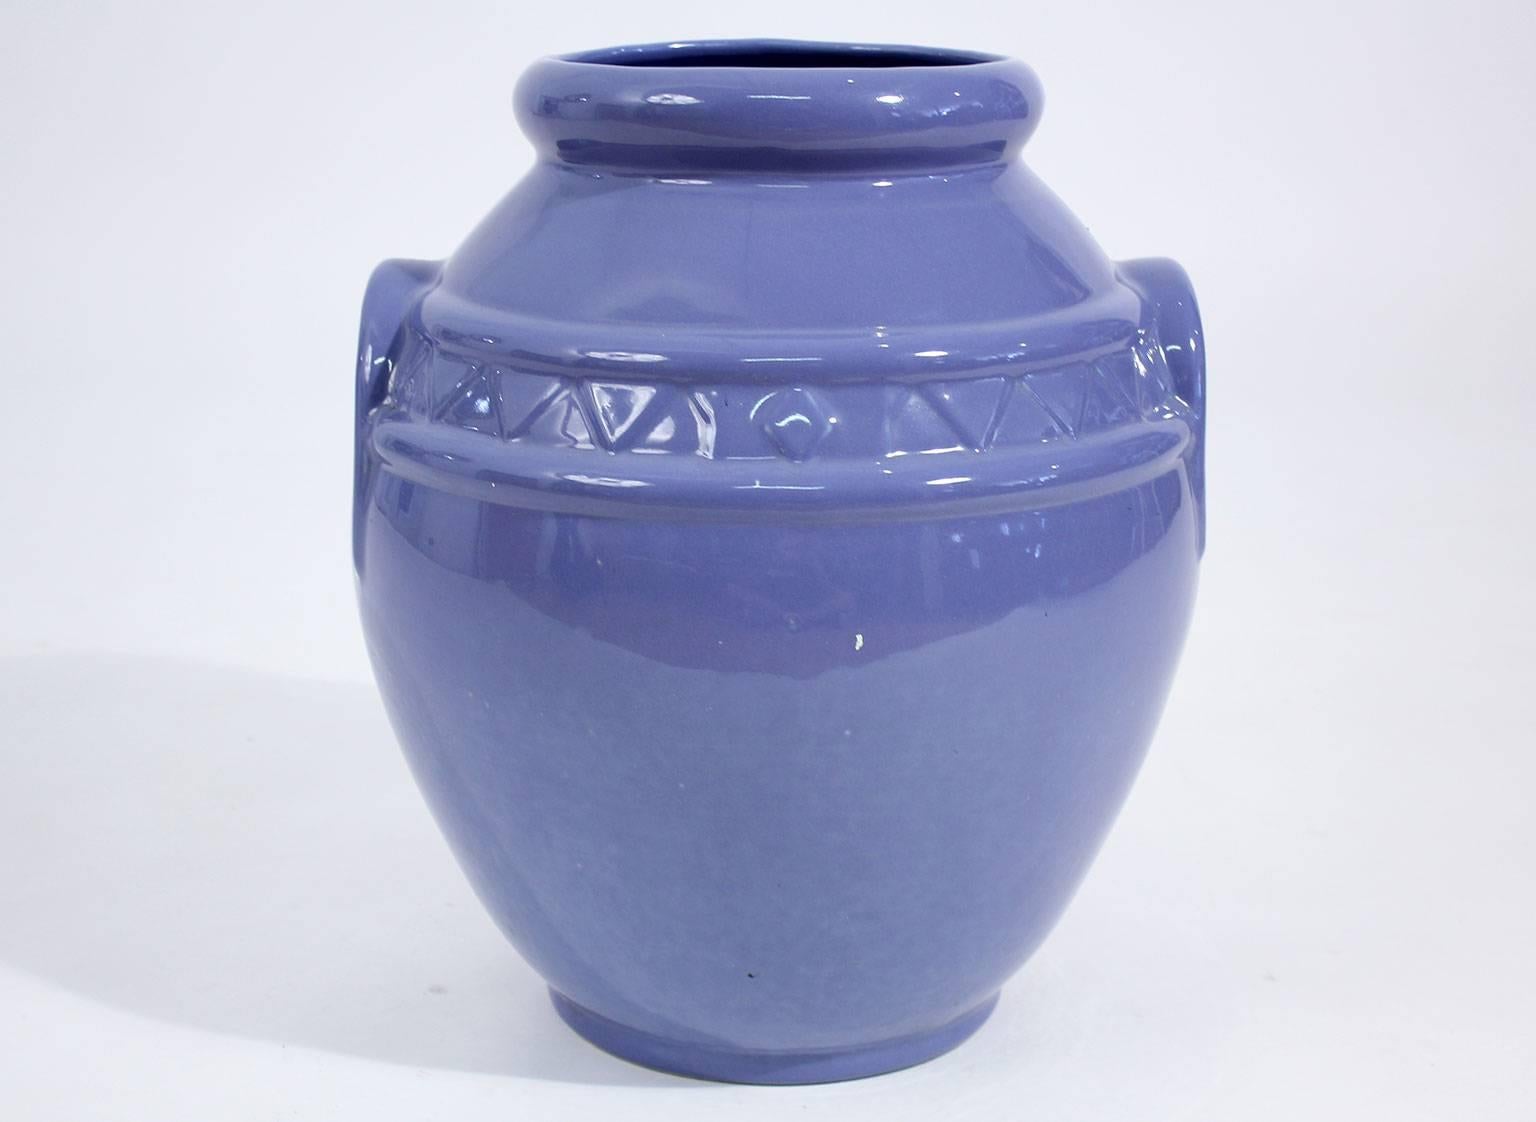 Beautiful handled Arts and Crafts Alamo Pottery garden oil jar/urn. In excellent shape with no damage. Is marked on the bottom. Great design and shape.